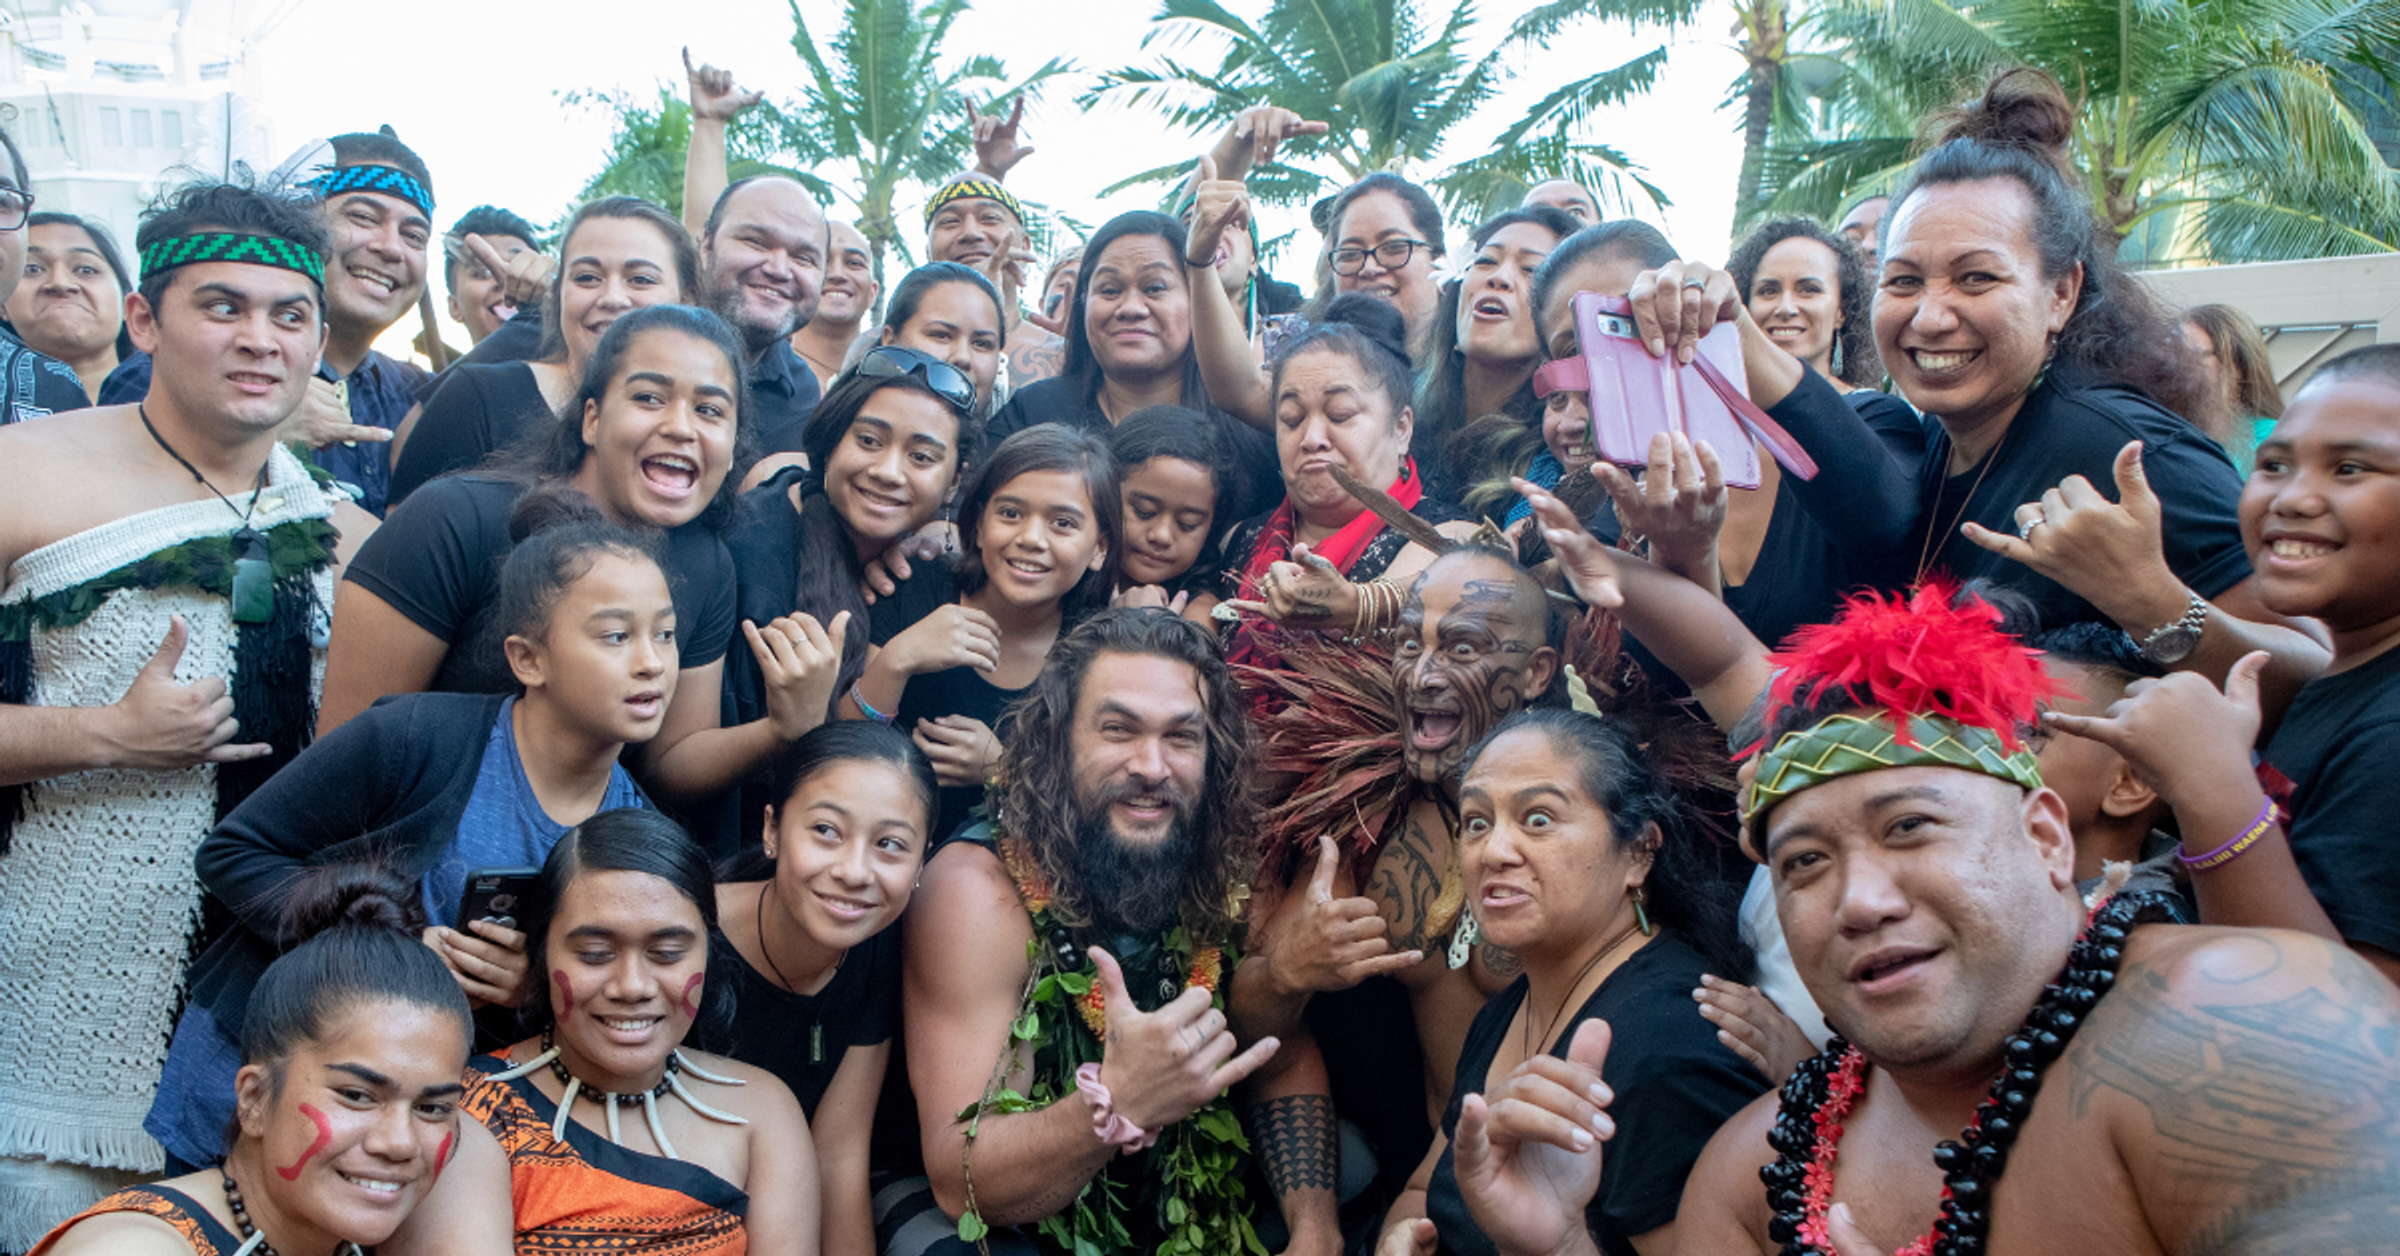 Jason Momoa Shares Blunt Warning For Anyone Considering Vacationing In Maui Amid Devastating Wildfires (comicsands.com)